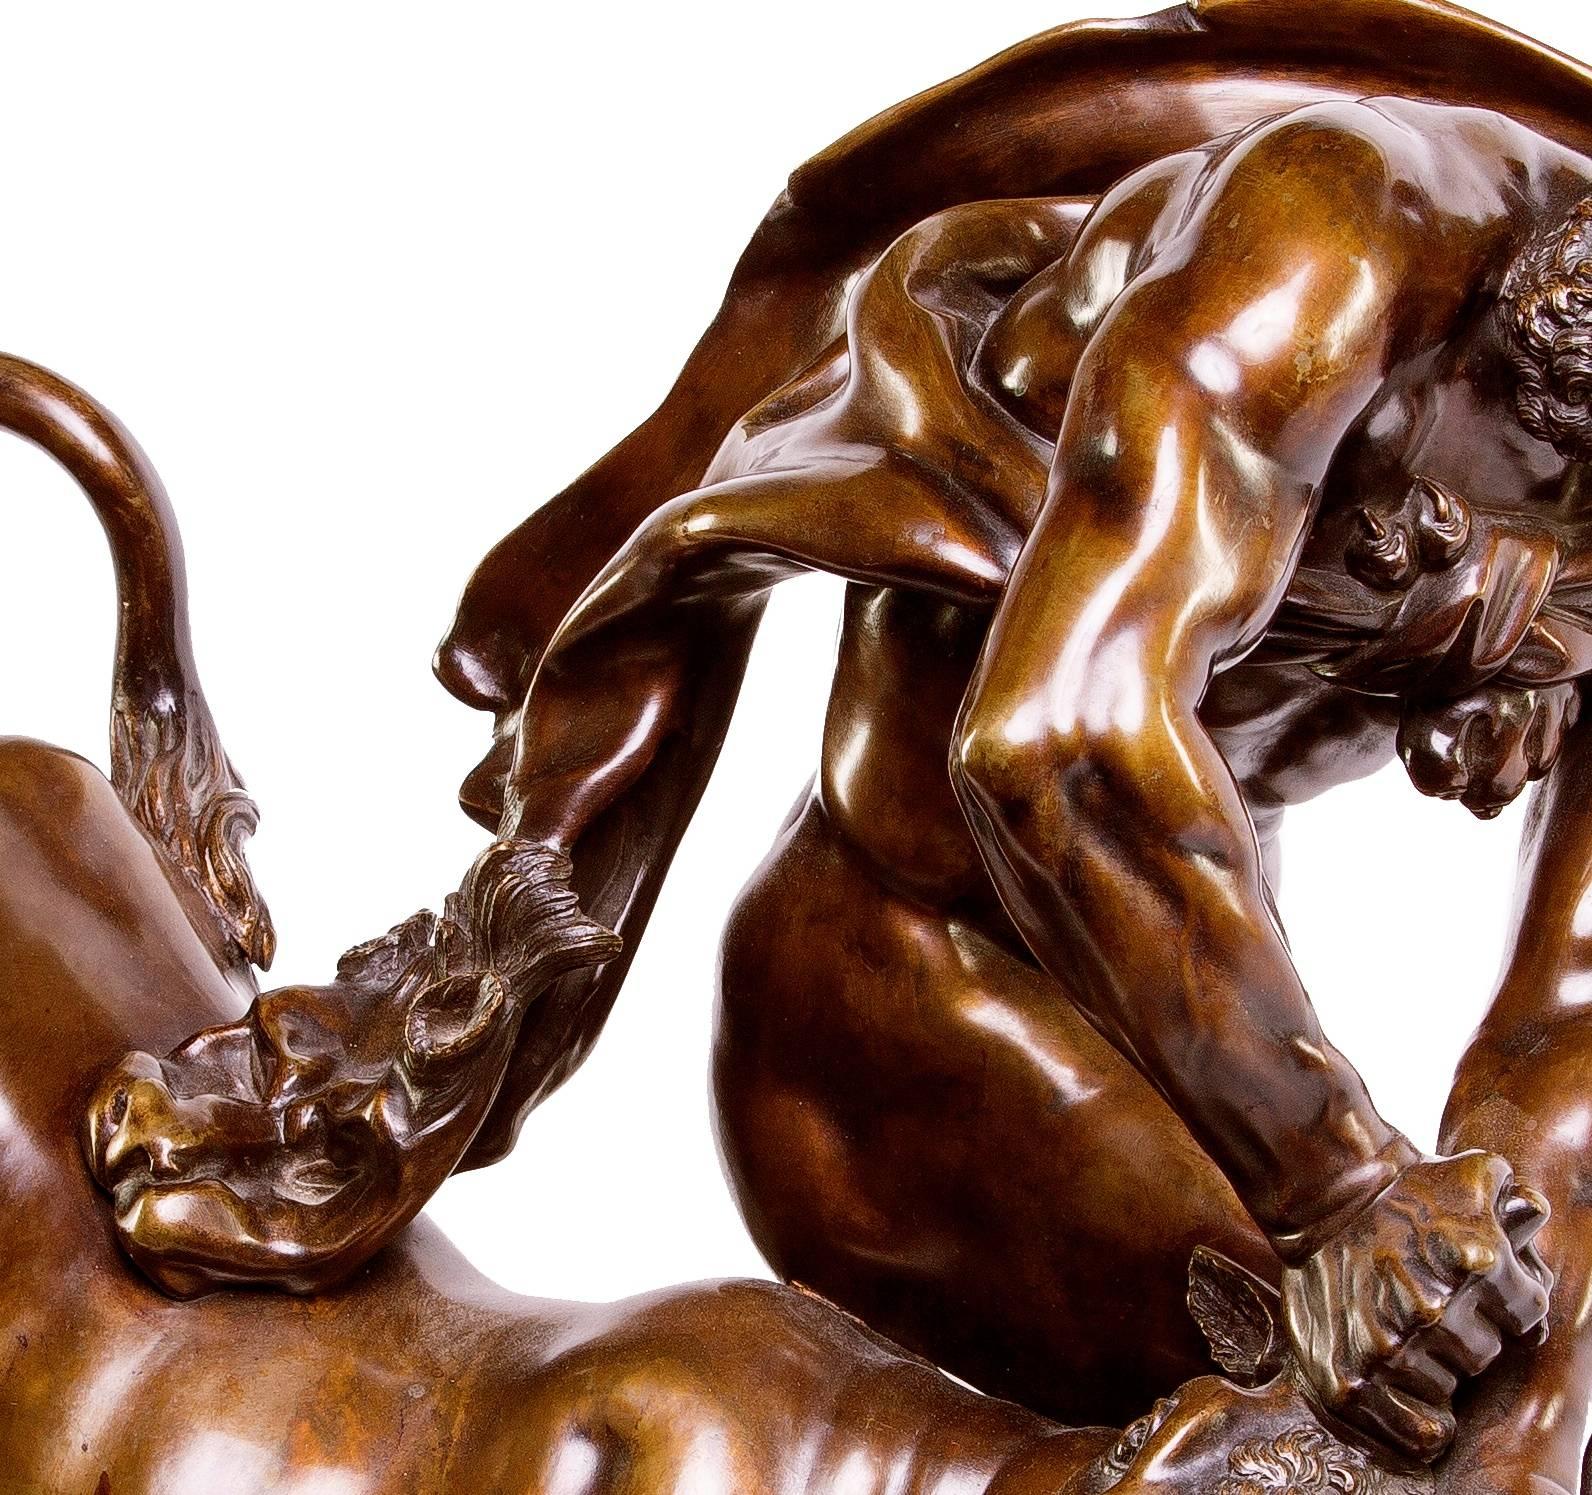 A large French bronze depicting Hercules wearing the pelt of the Neiman lion, wresting with the Cretan bull, which was two of the twelve labors of Hercules in Greek mythology.